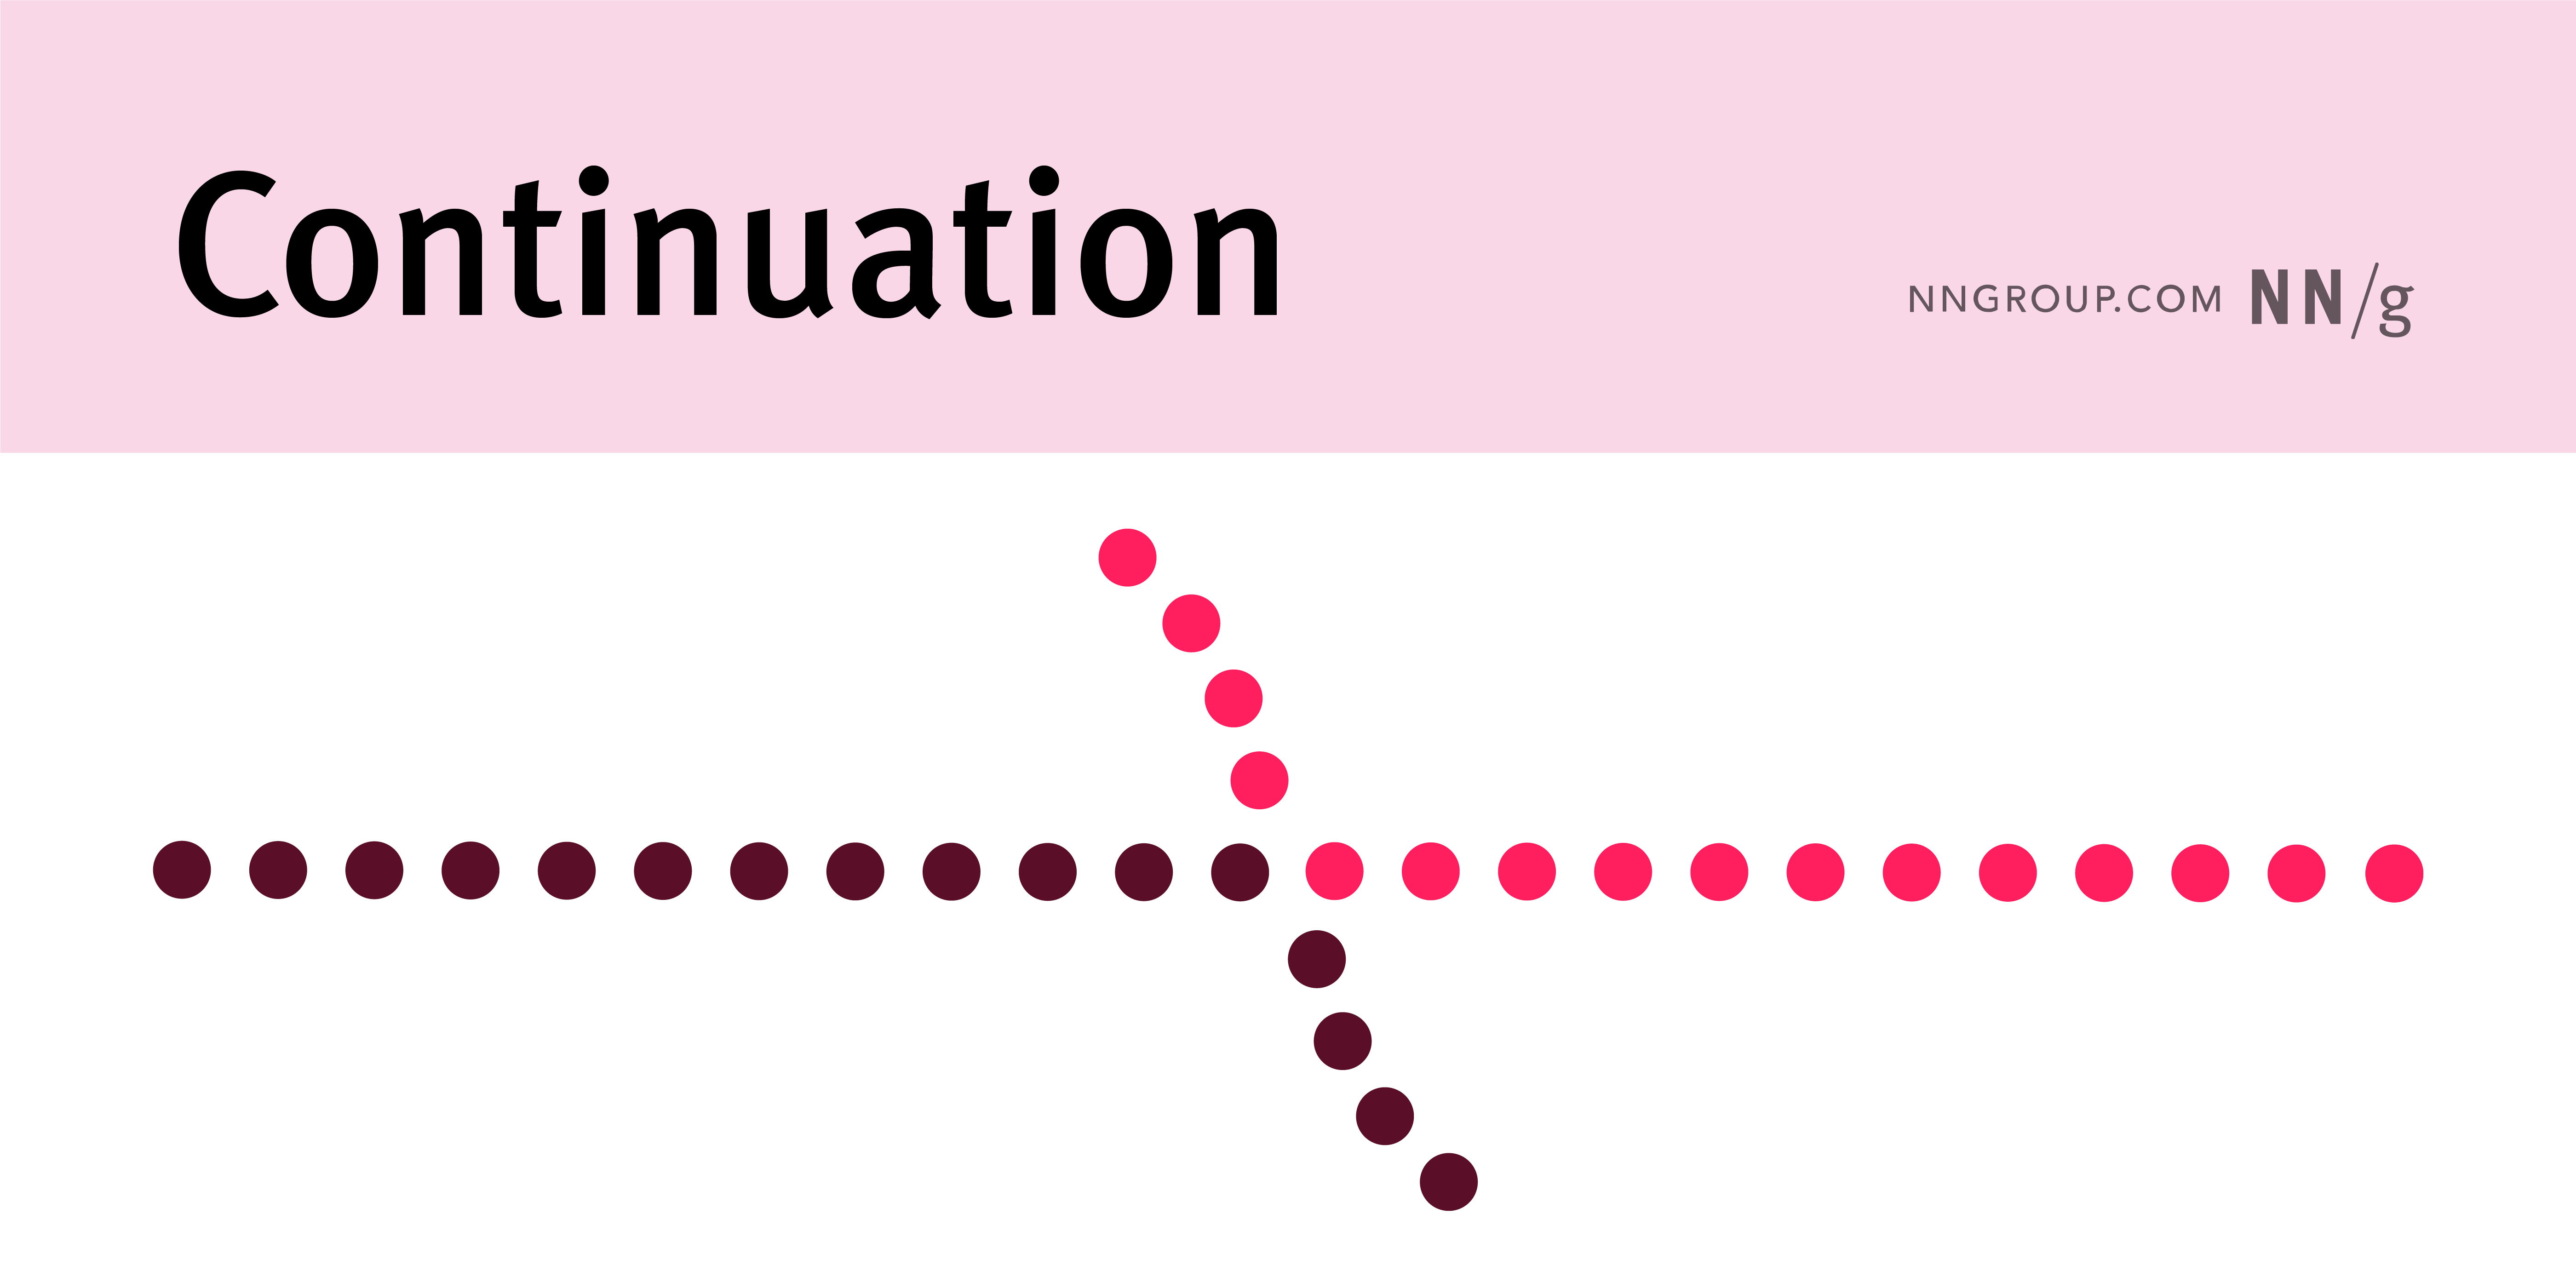 A series of dark red dots that transition into pink dots forming a diagonal line across a pink background